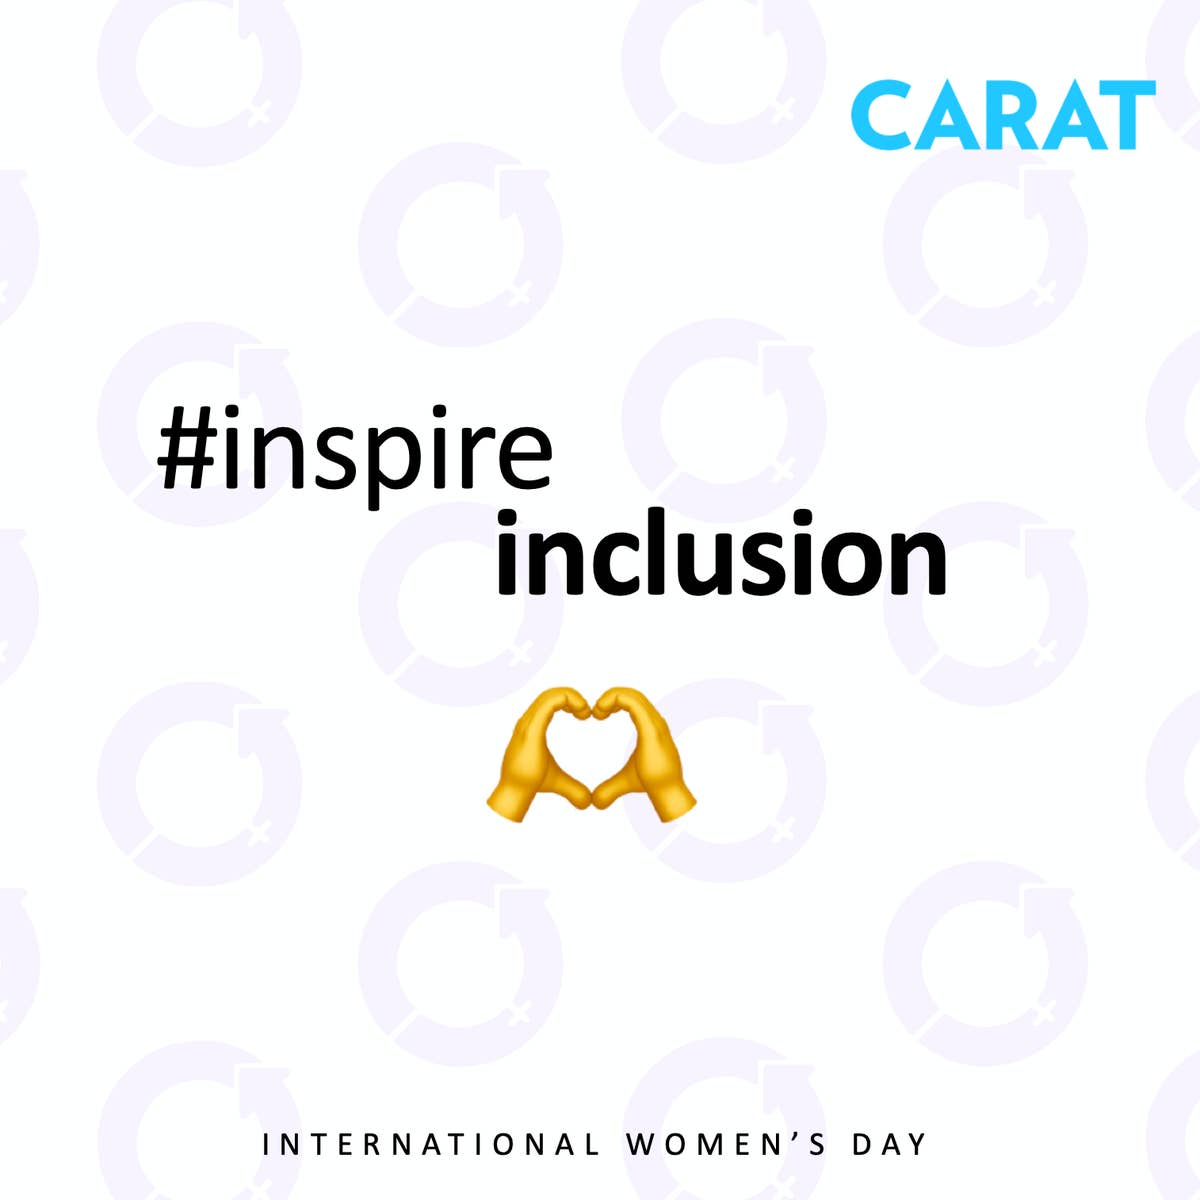 Inspiration, advice and hopes for the future: The women of Carat reflect this International Women’s Day 